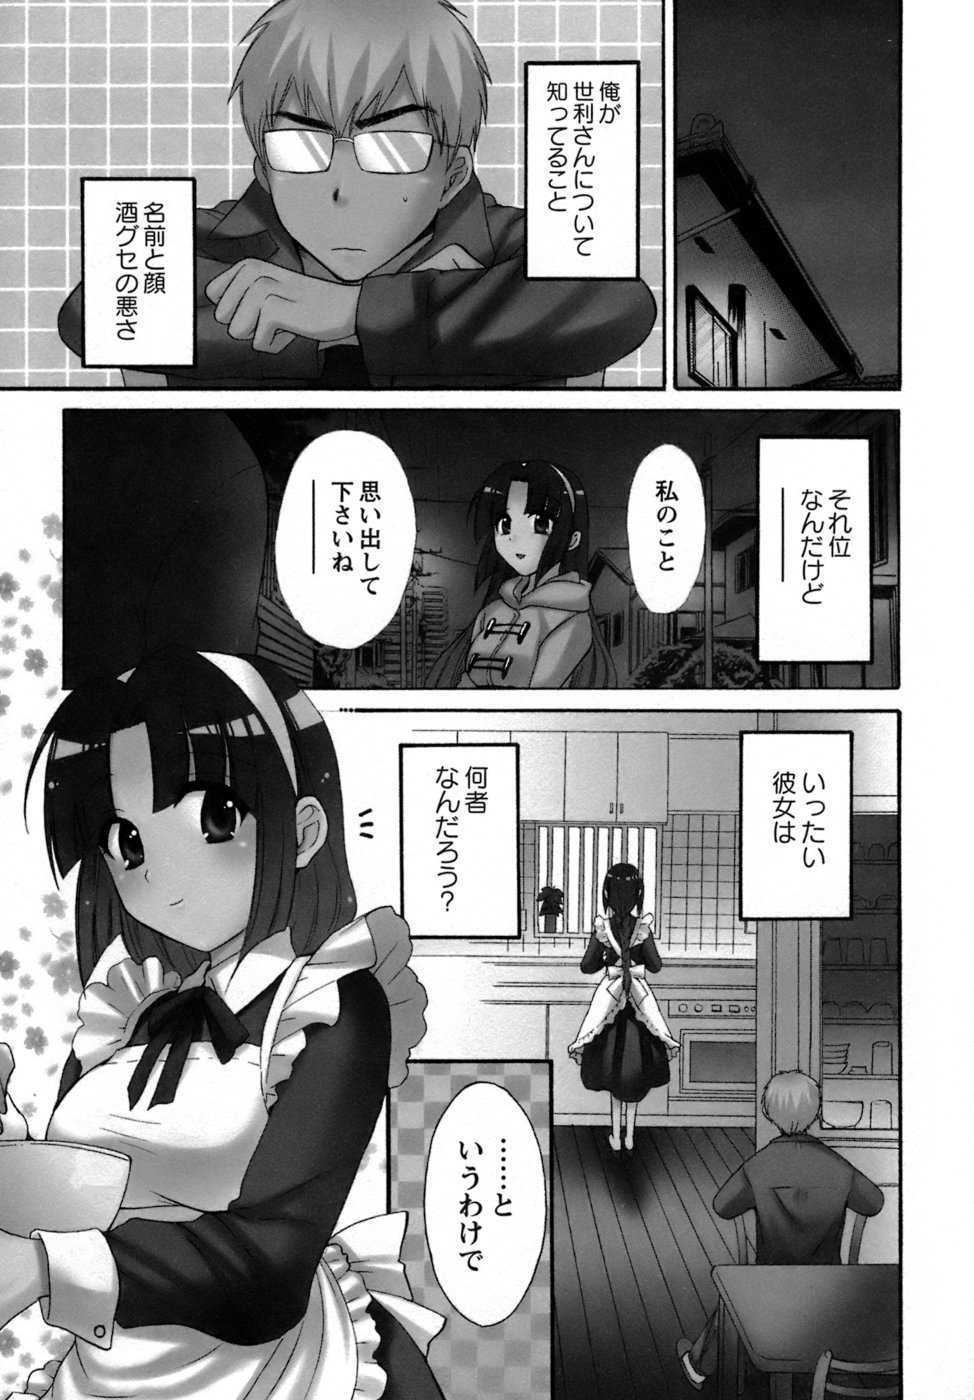 [Pon Takahanada] A Hundred of the Way of 100 Living with Her [ポン貴花田] 家政婦(かのじょ)と暮らす100の方法